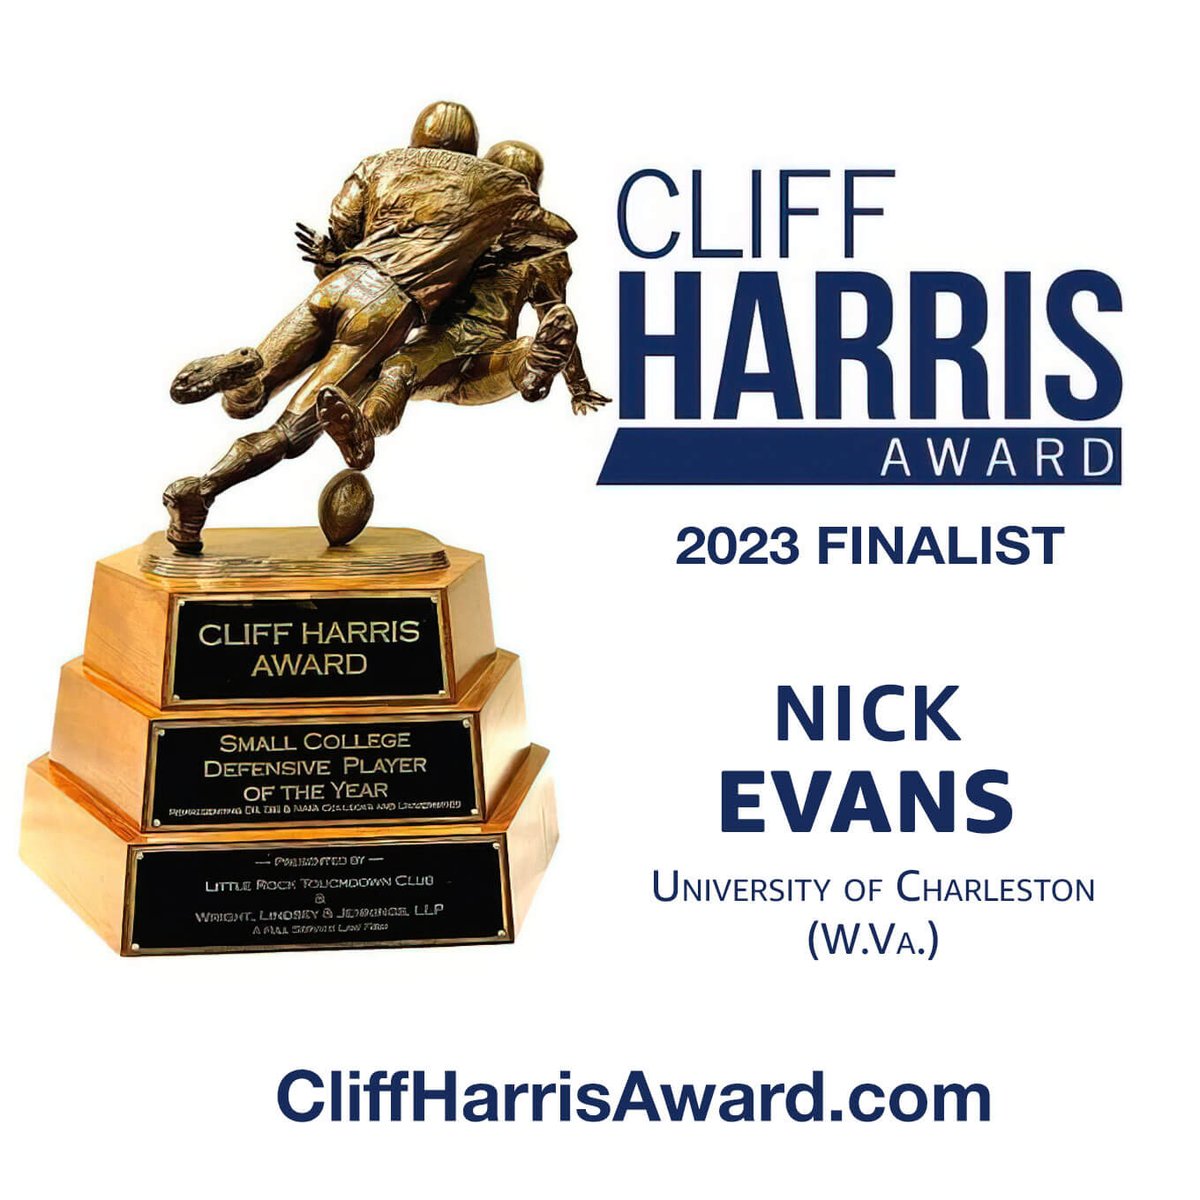 Congratulations to Nick Evans from University of Charleston (W.Va.) on your selection as a finalist for the 2023 D2 Cliff Harris Award! @UCWV_Football @ucwv_athletics None